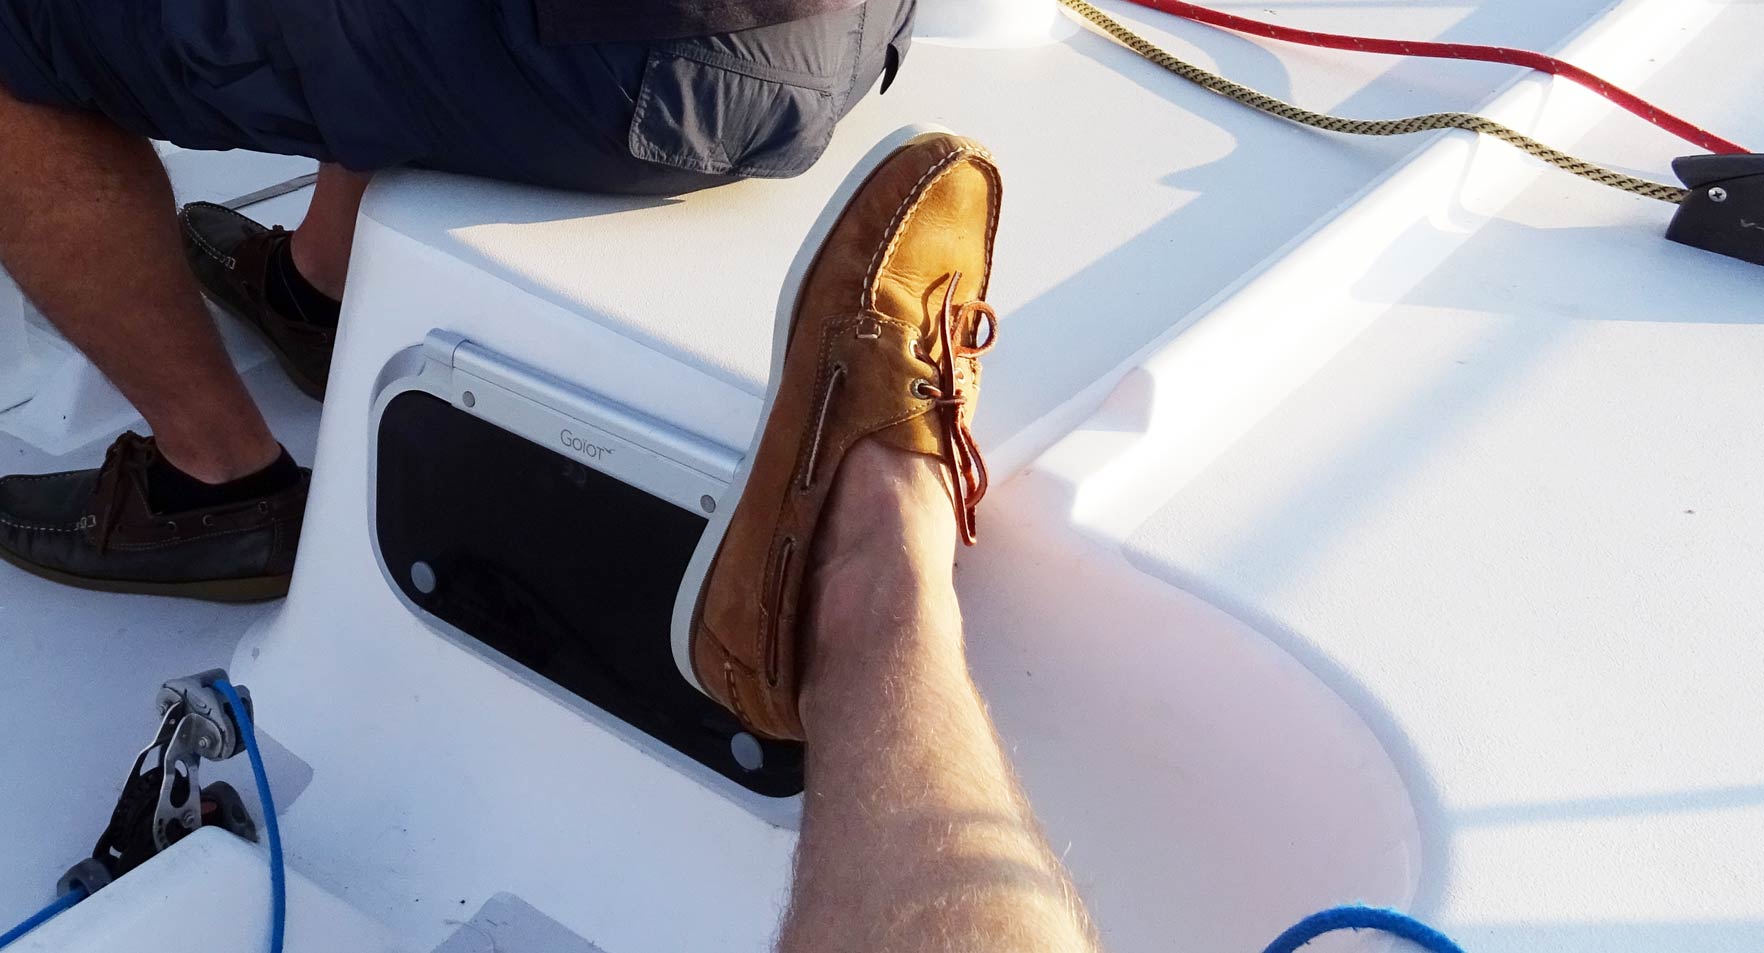 Once fited, a pair of Docksides is Skipper´s best friend